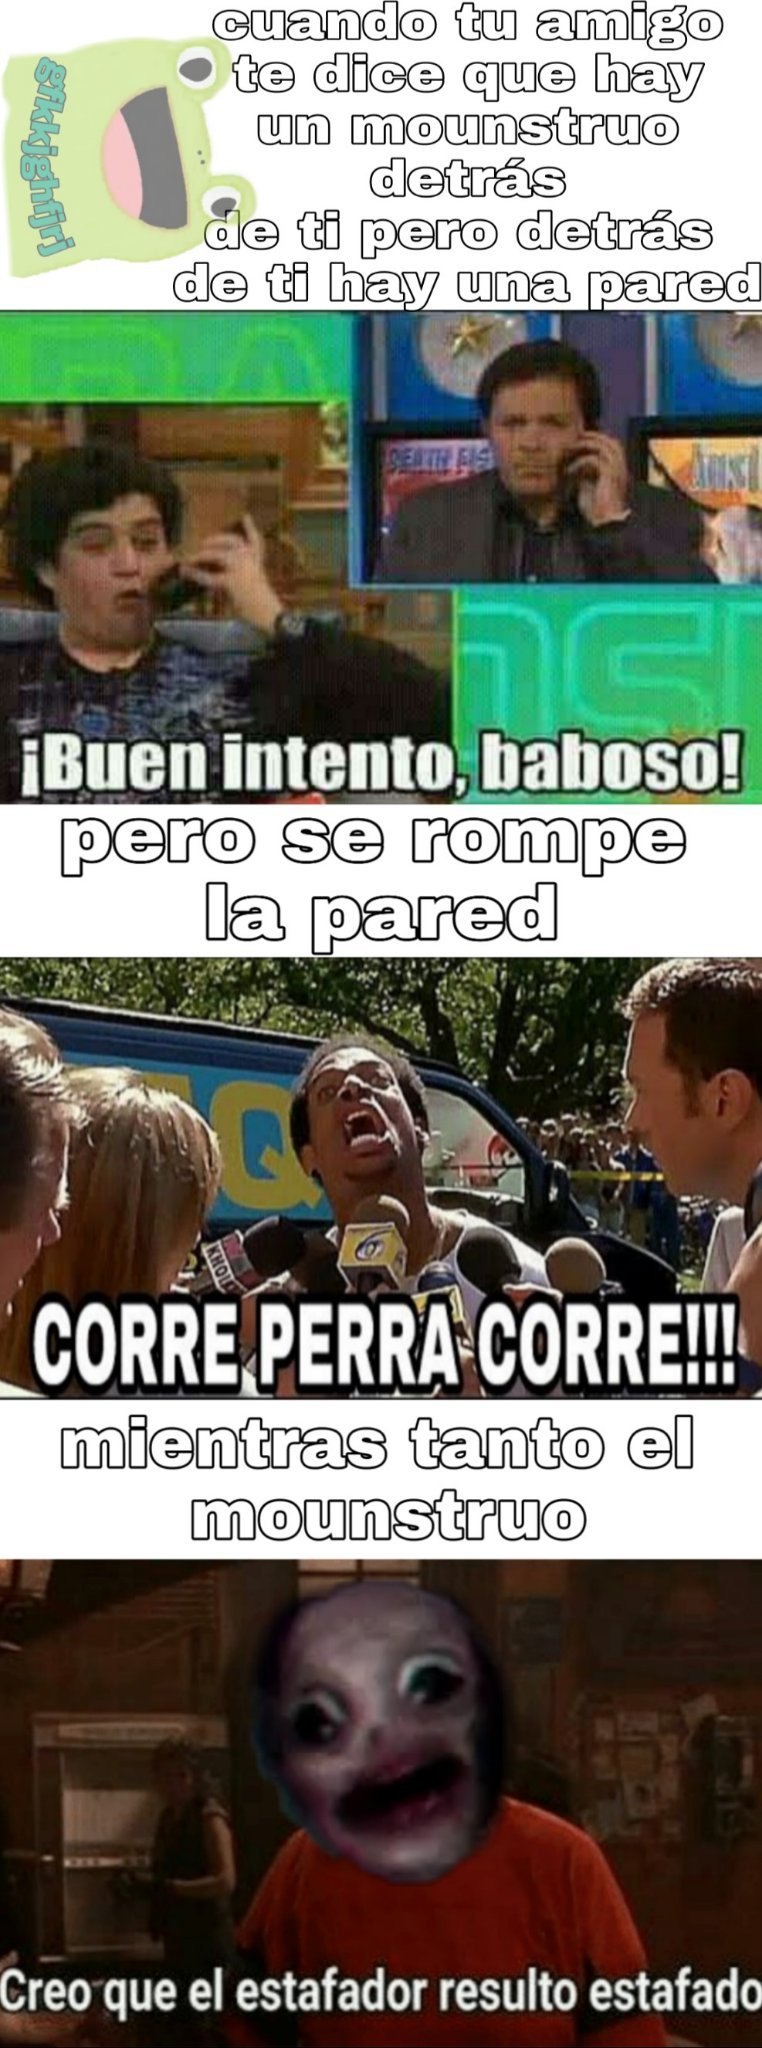 Corre forest! - meme